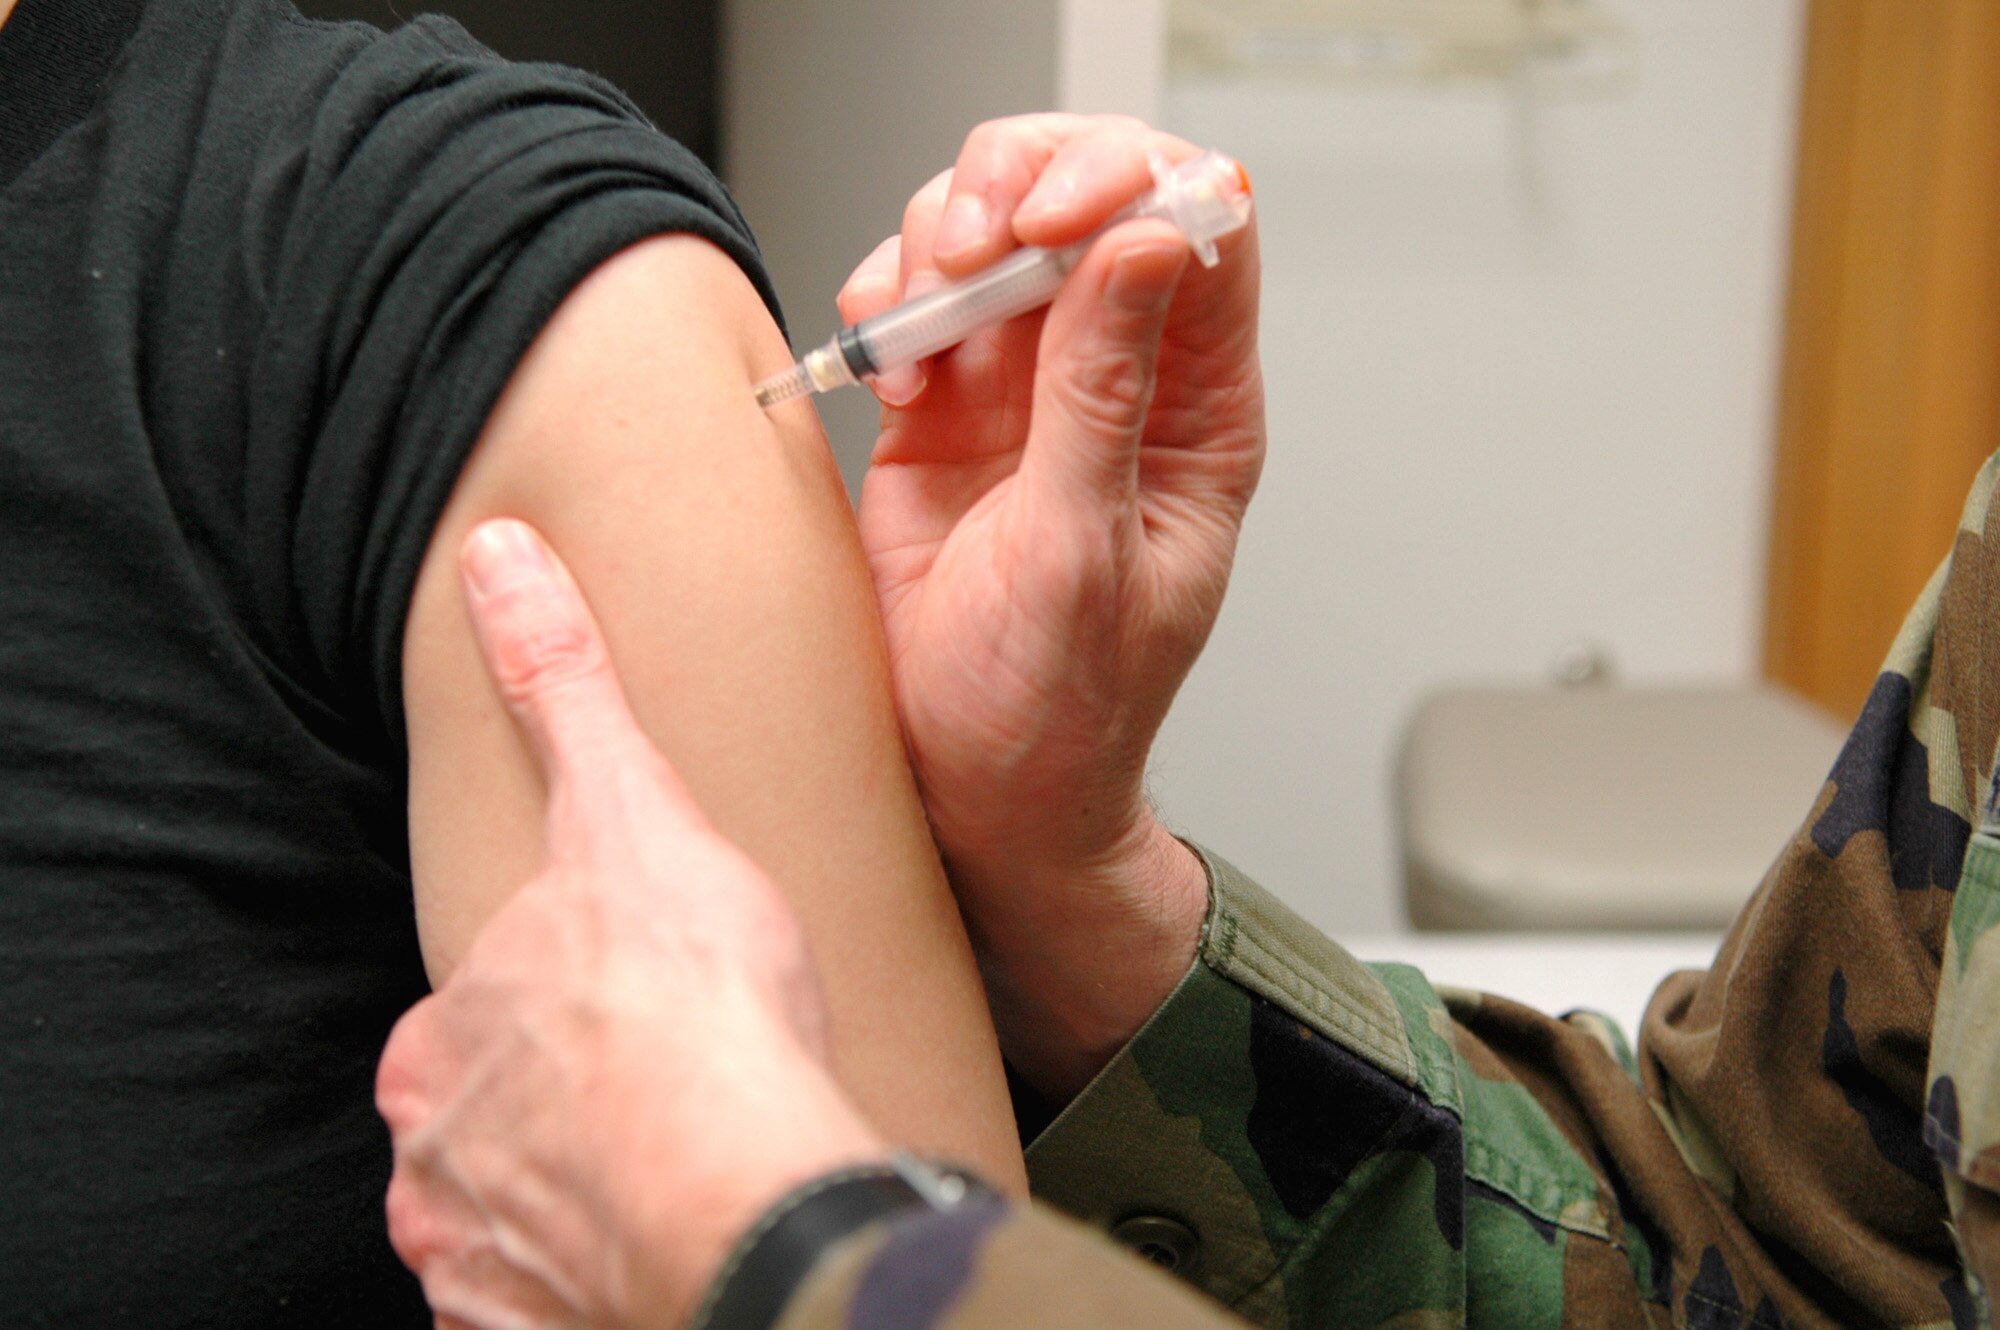 The Human Papilloma Virus, or HPV, vaccine is available at the Fairchild clinic for active-duty females through age 26, and for all 11 and 12-year-old TRICARE beneficiaries. HPV currently affects more than 20 million people, according to the Center for Disease Control and Prevention. (Photo by Airman 1st Class Kali L. Gradishar)

